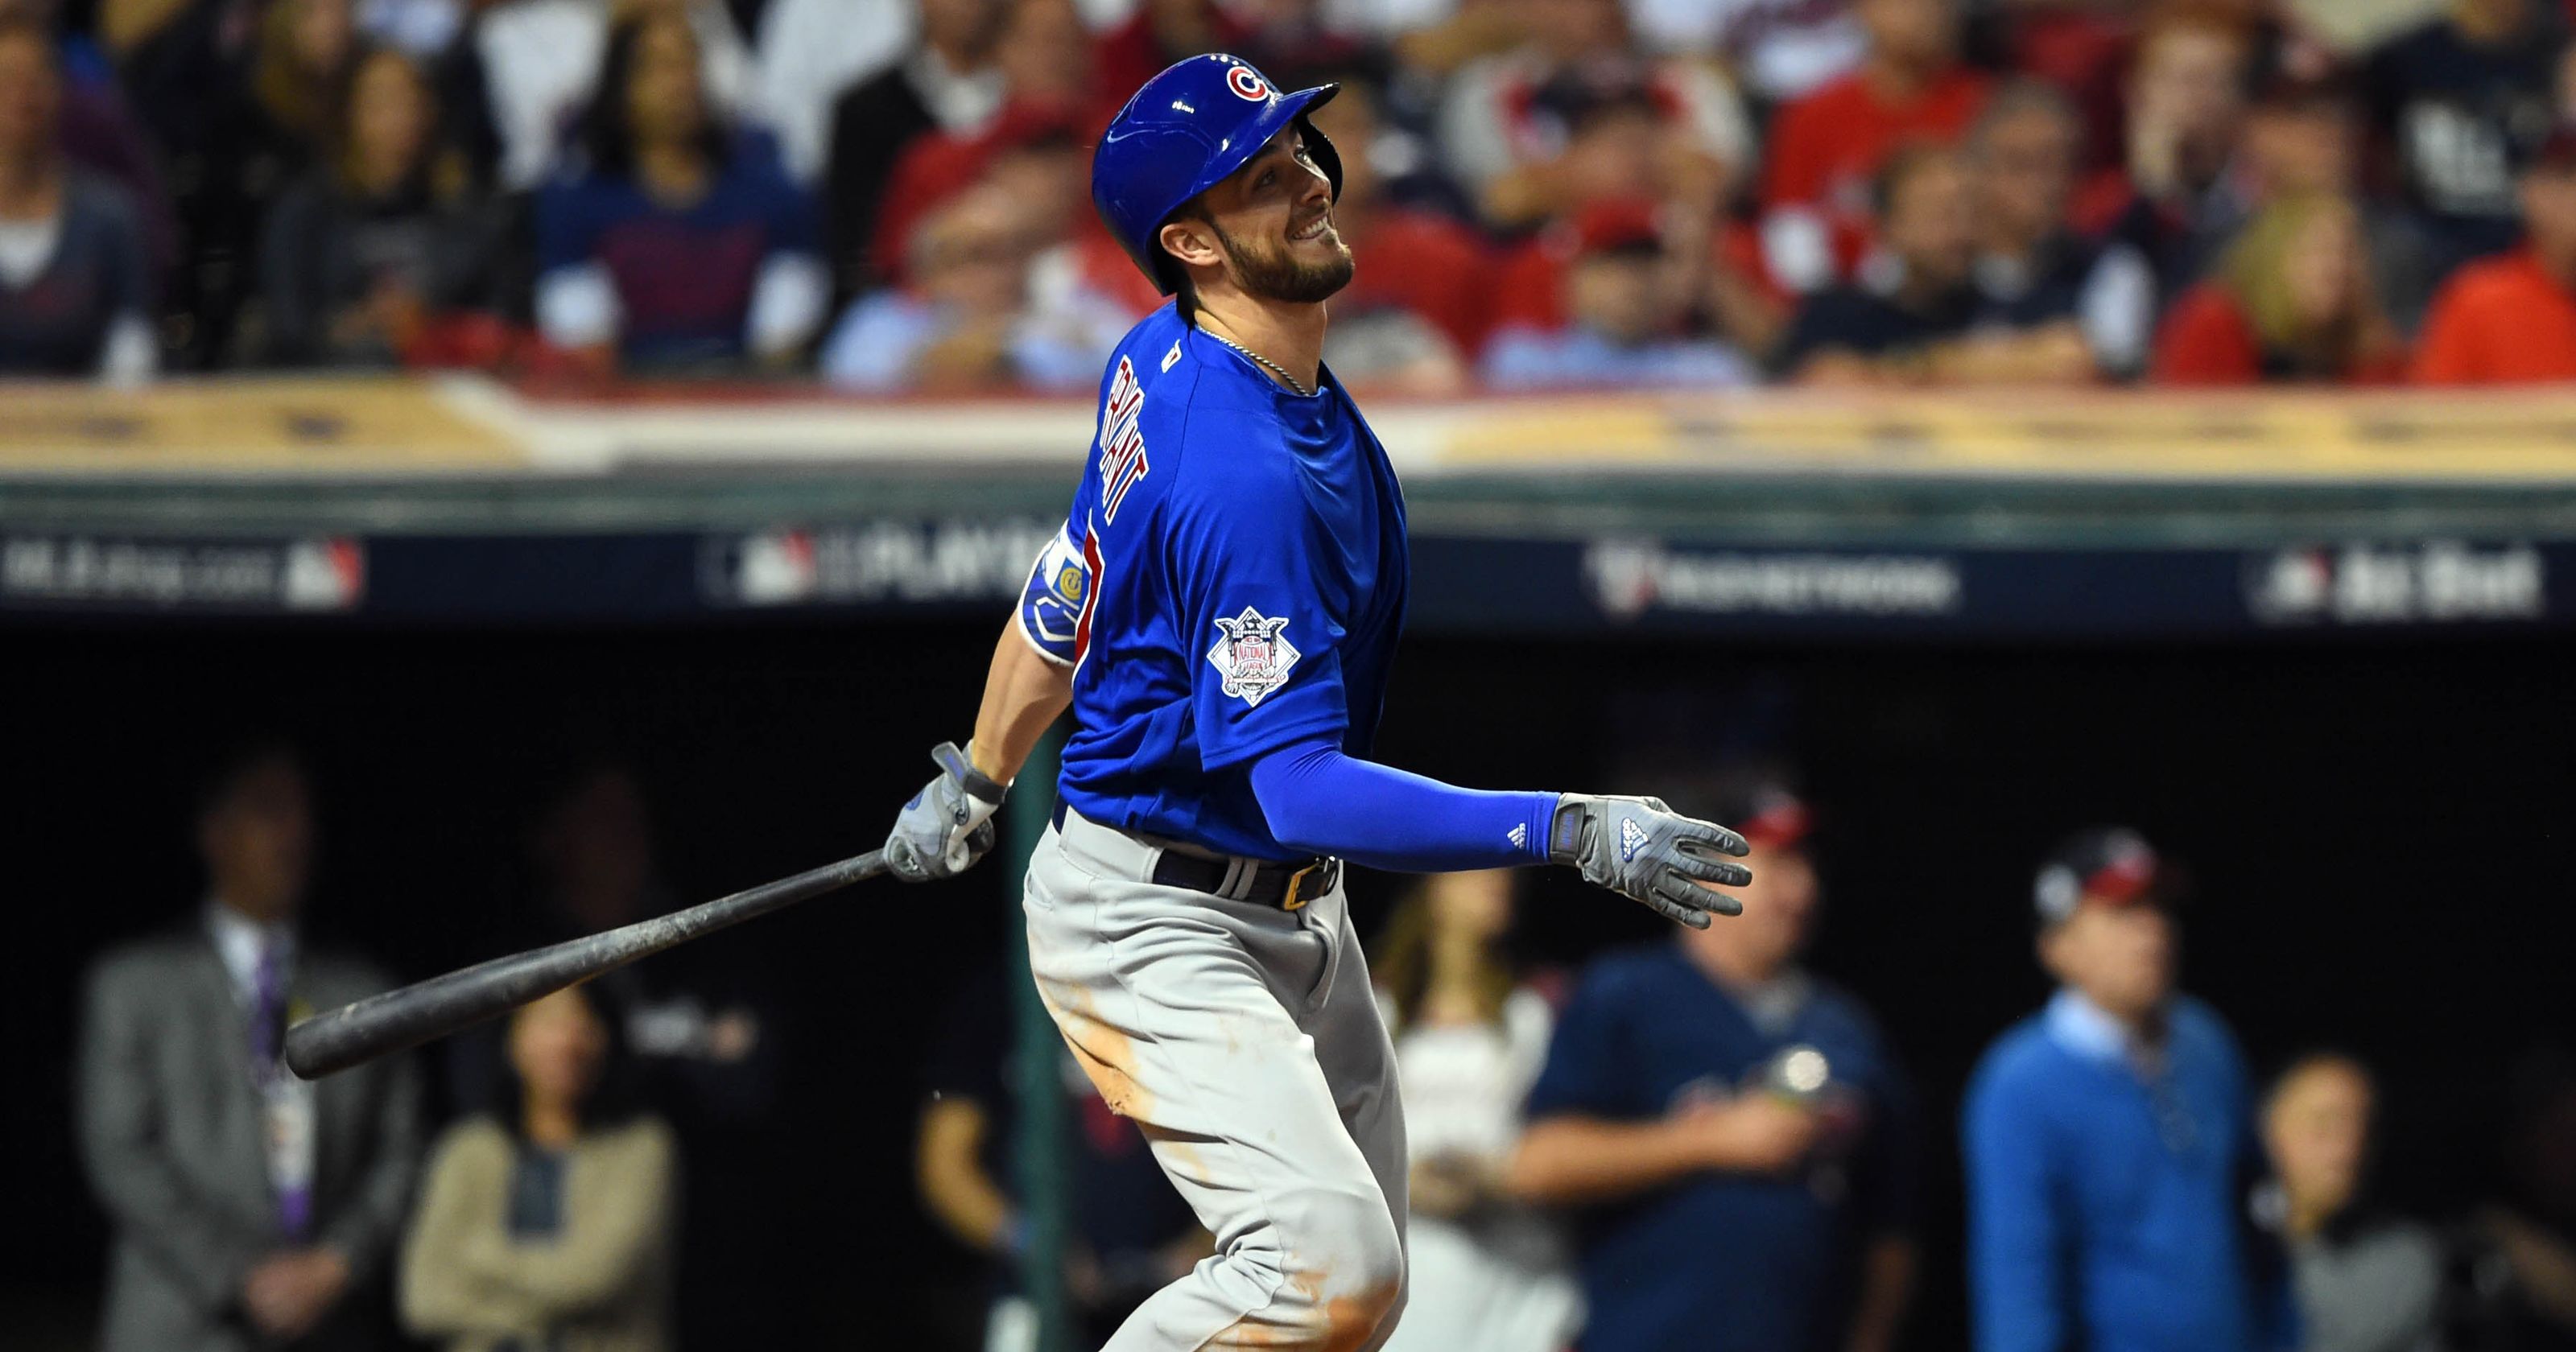 Cubs’ Kris Bryant Hits Disabled List For First Time in MLB Career